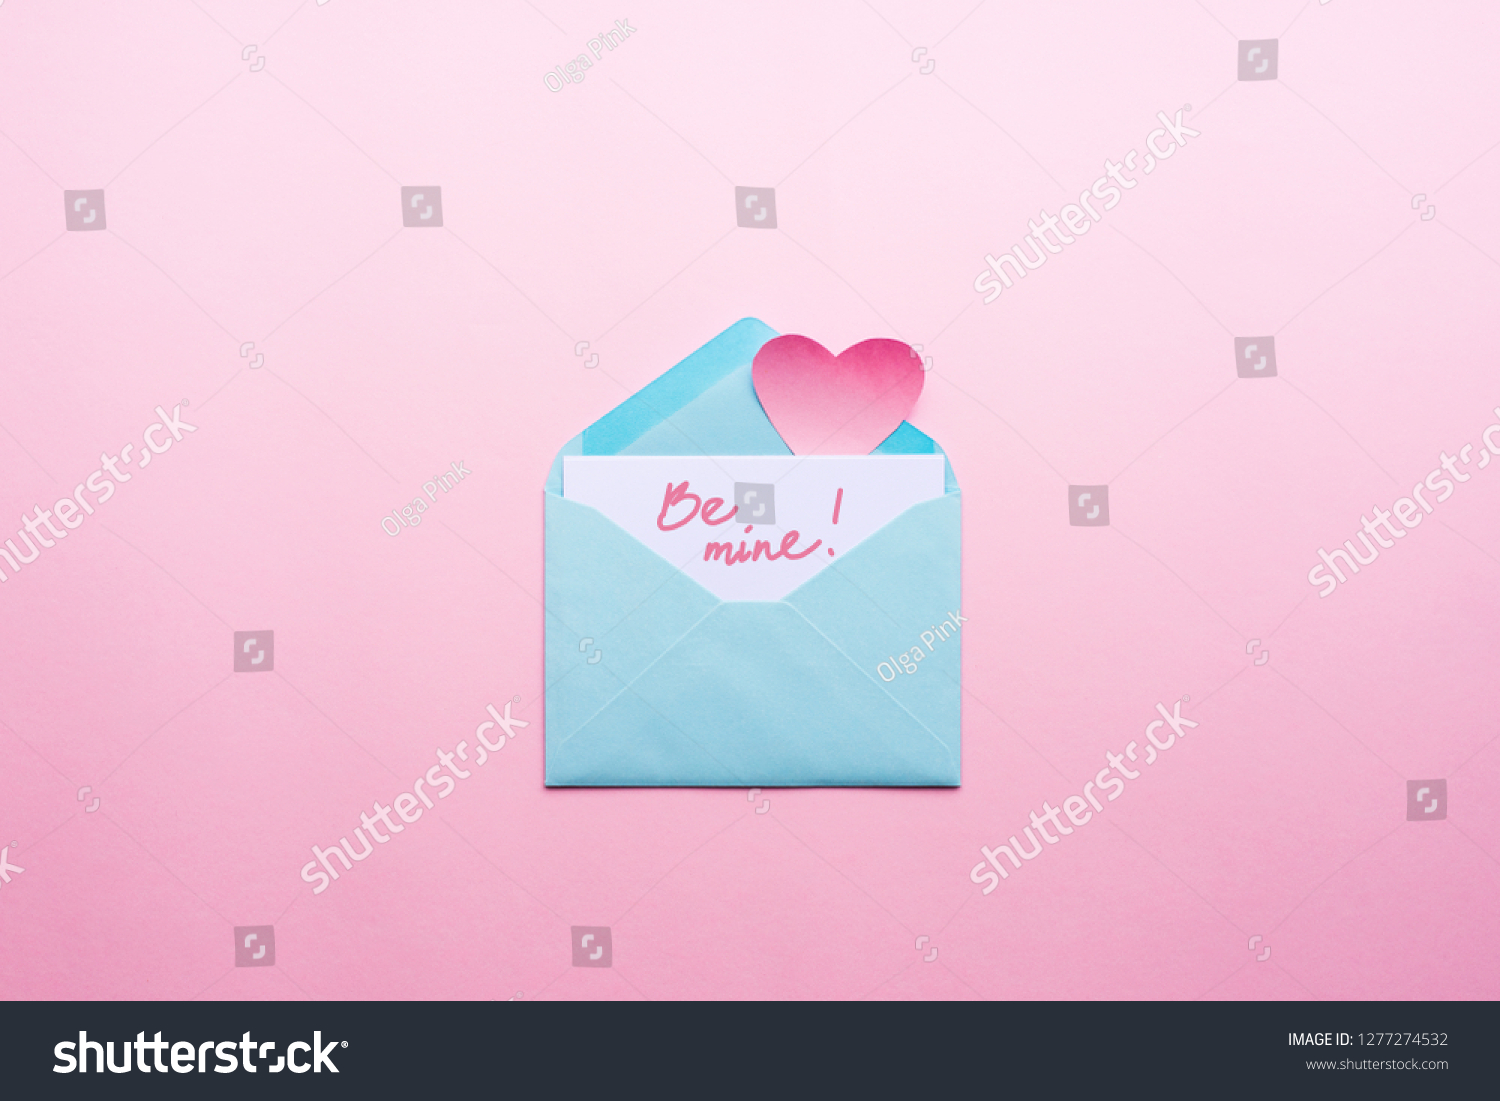 Message Be mine Blue letter with pink heart cartoon style from paper on cardboard background. Valentine day minimal concept Flat lay Top view #1277274532